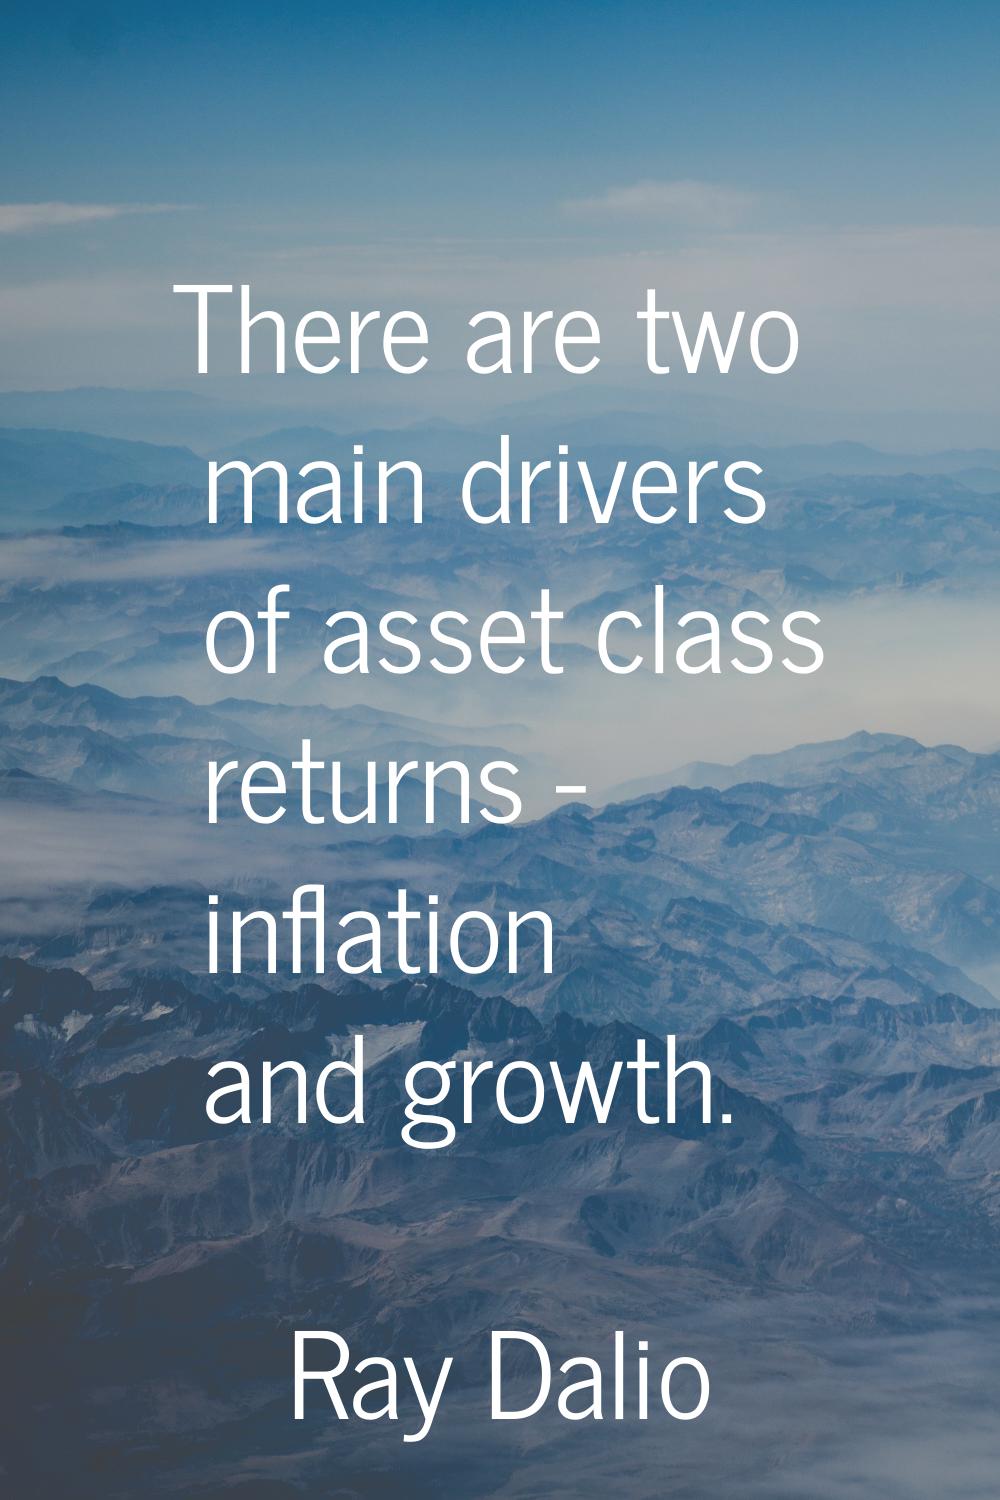 There are two main drivers of asset class returns - inflation and growth.